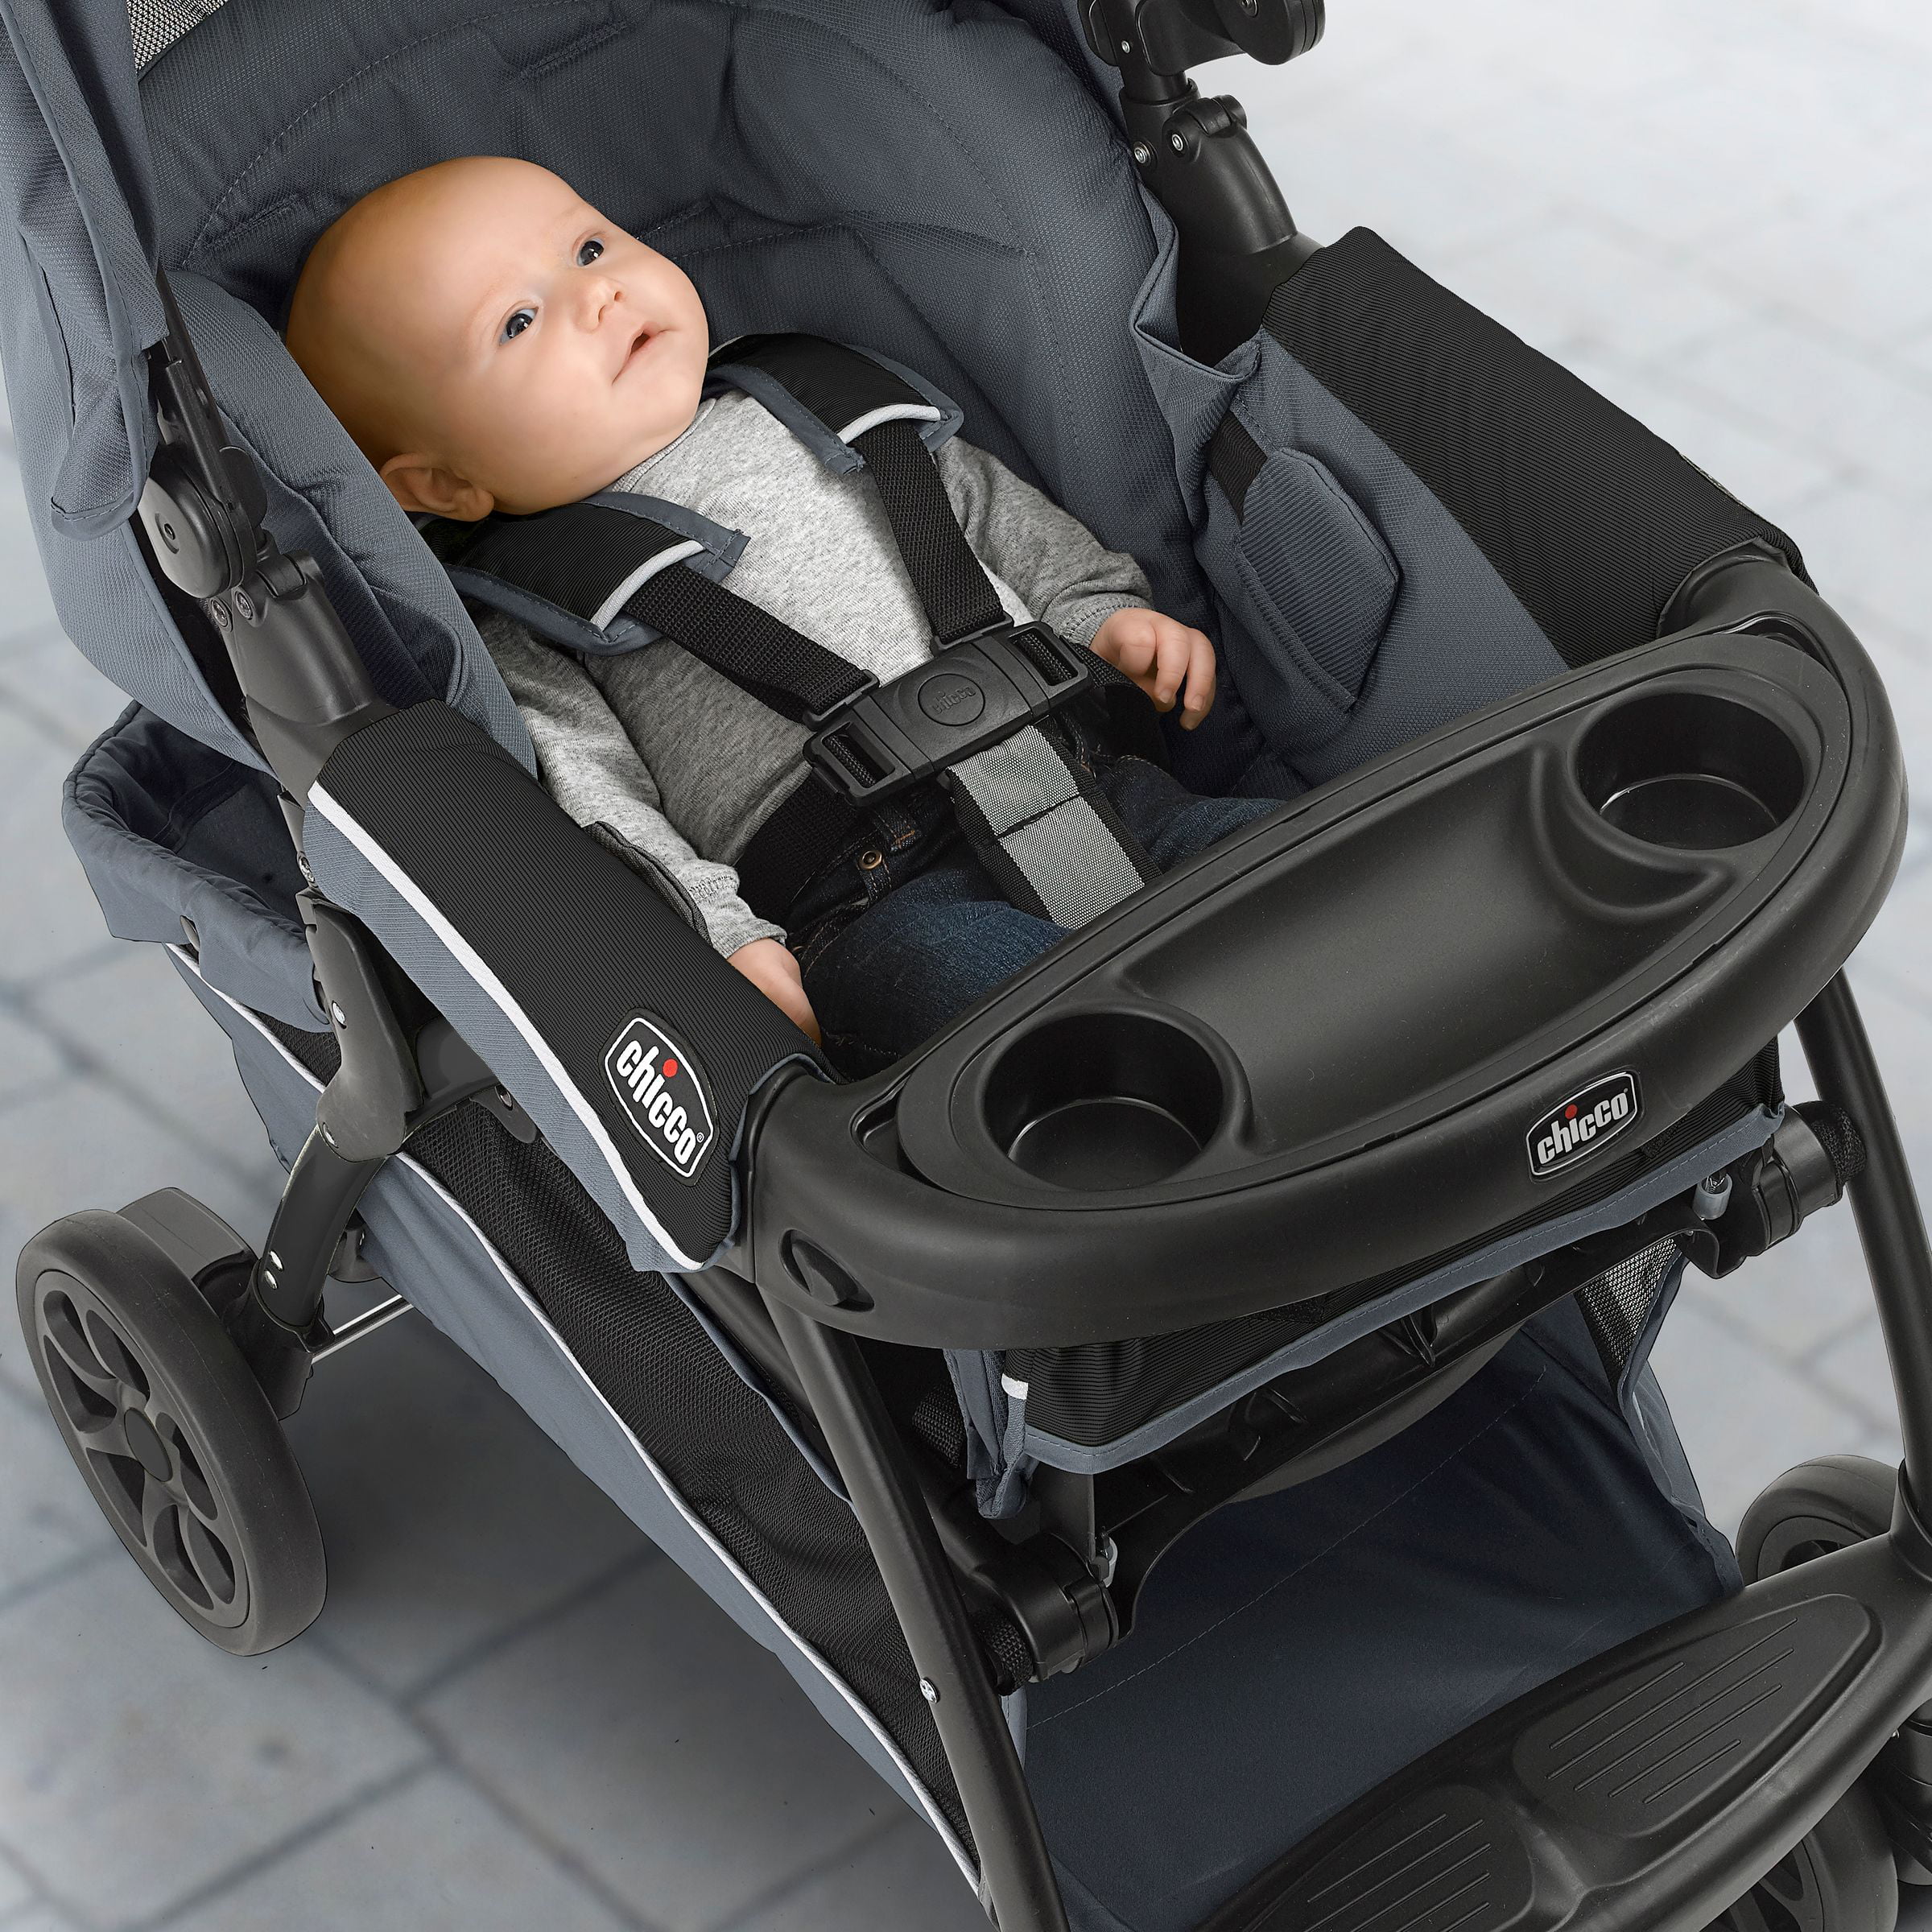 chicco cortina cx travel system reviews